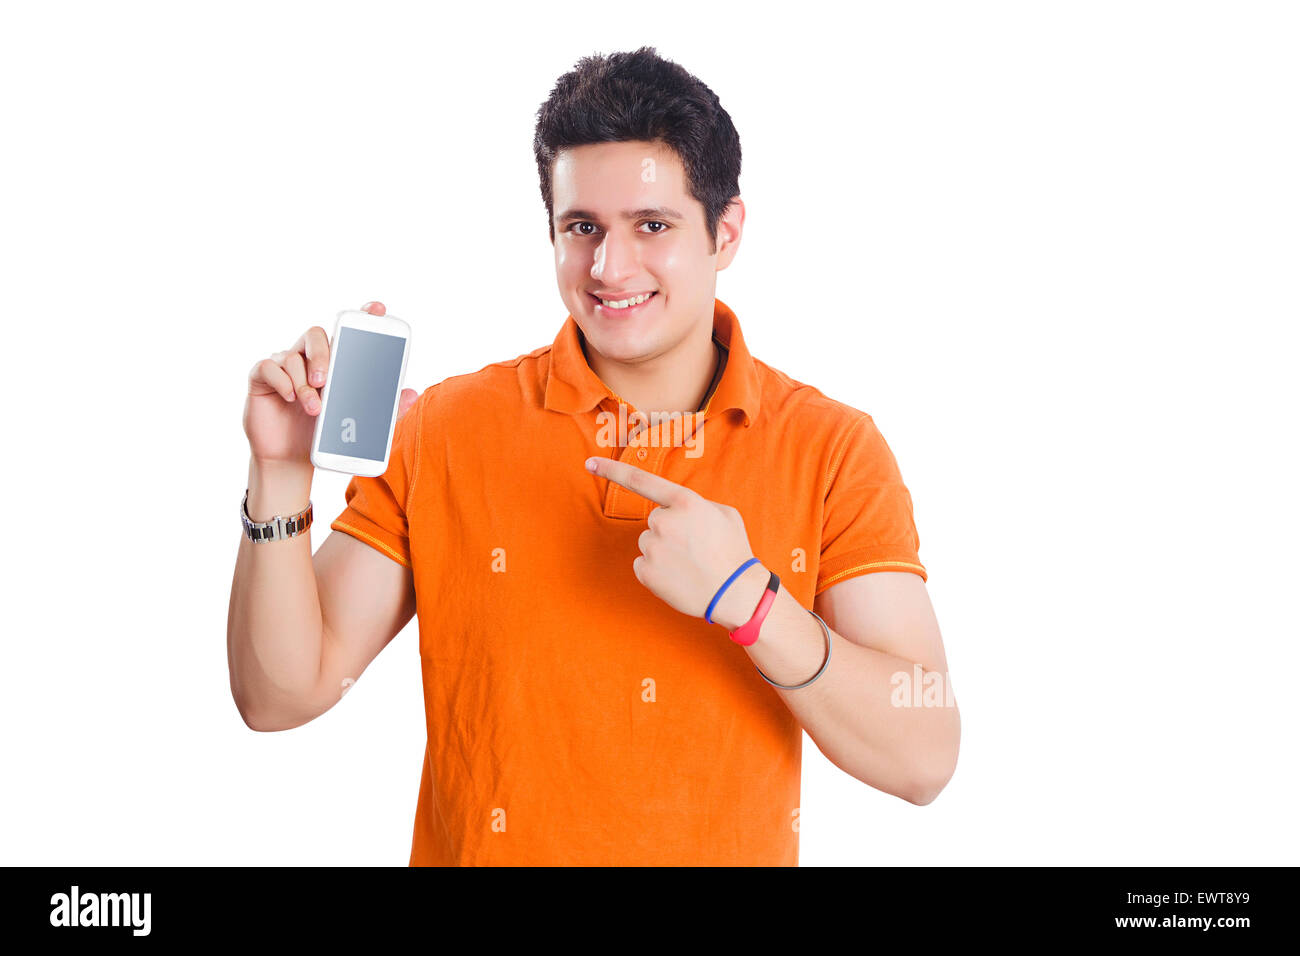 1 indian man showing Cell Phone Quality Stock Photo